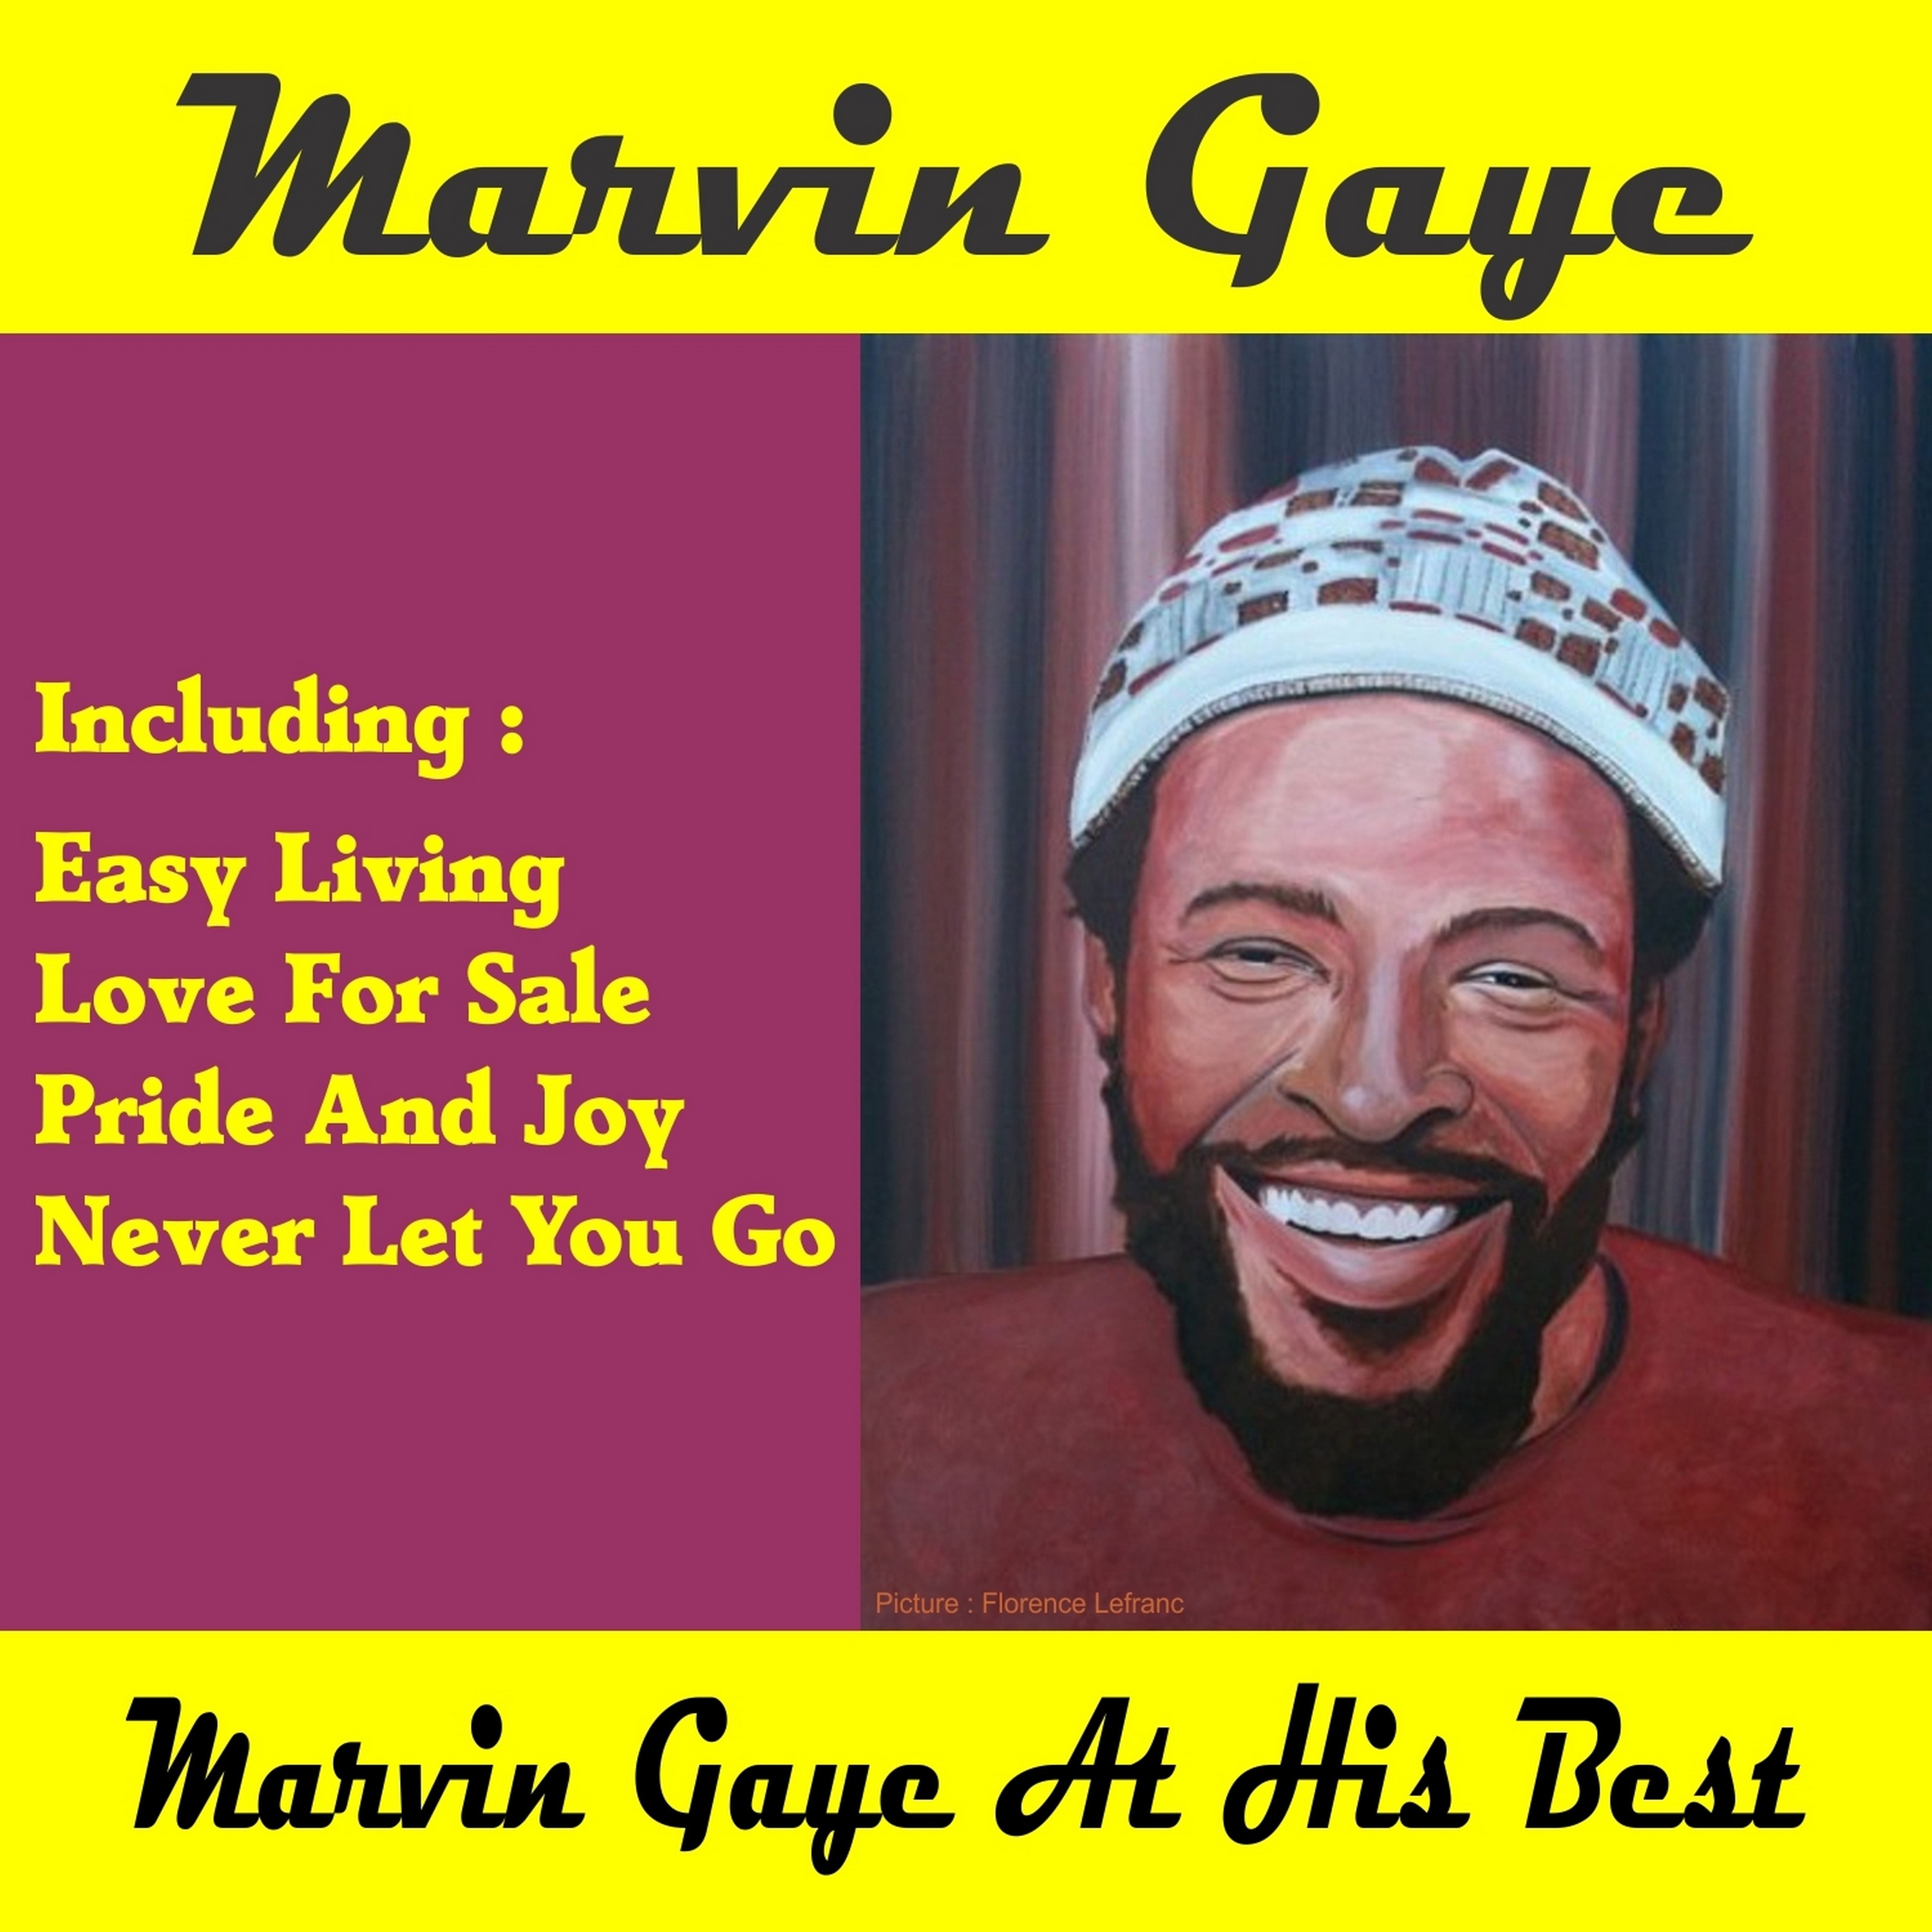 Marvin Gaye at His Best